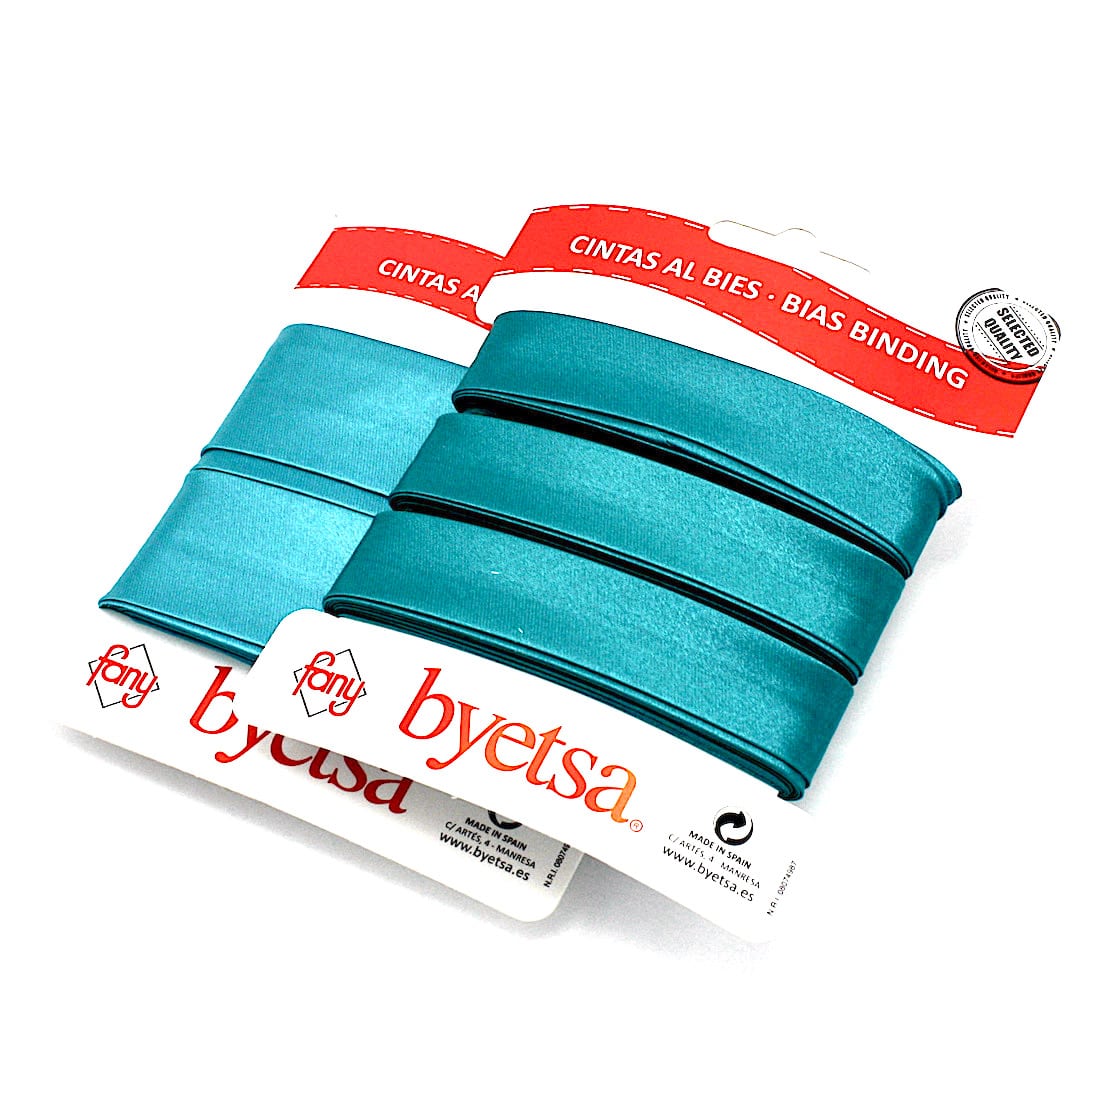 5 metres of Pre-packed Satin Bias Binding Tape in 18mm and 30mm width in Kingfisher 23